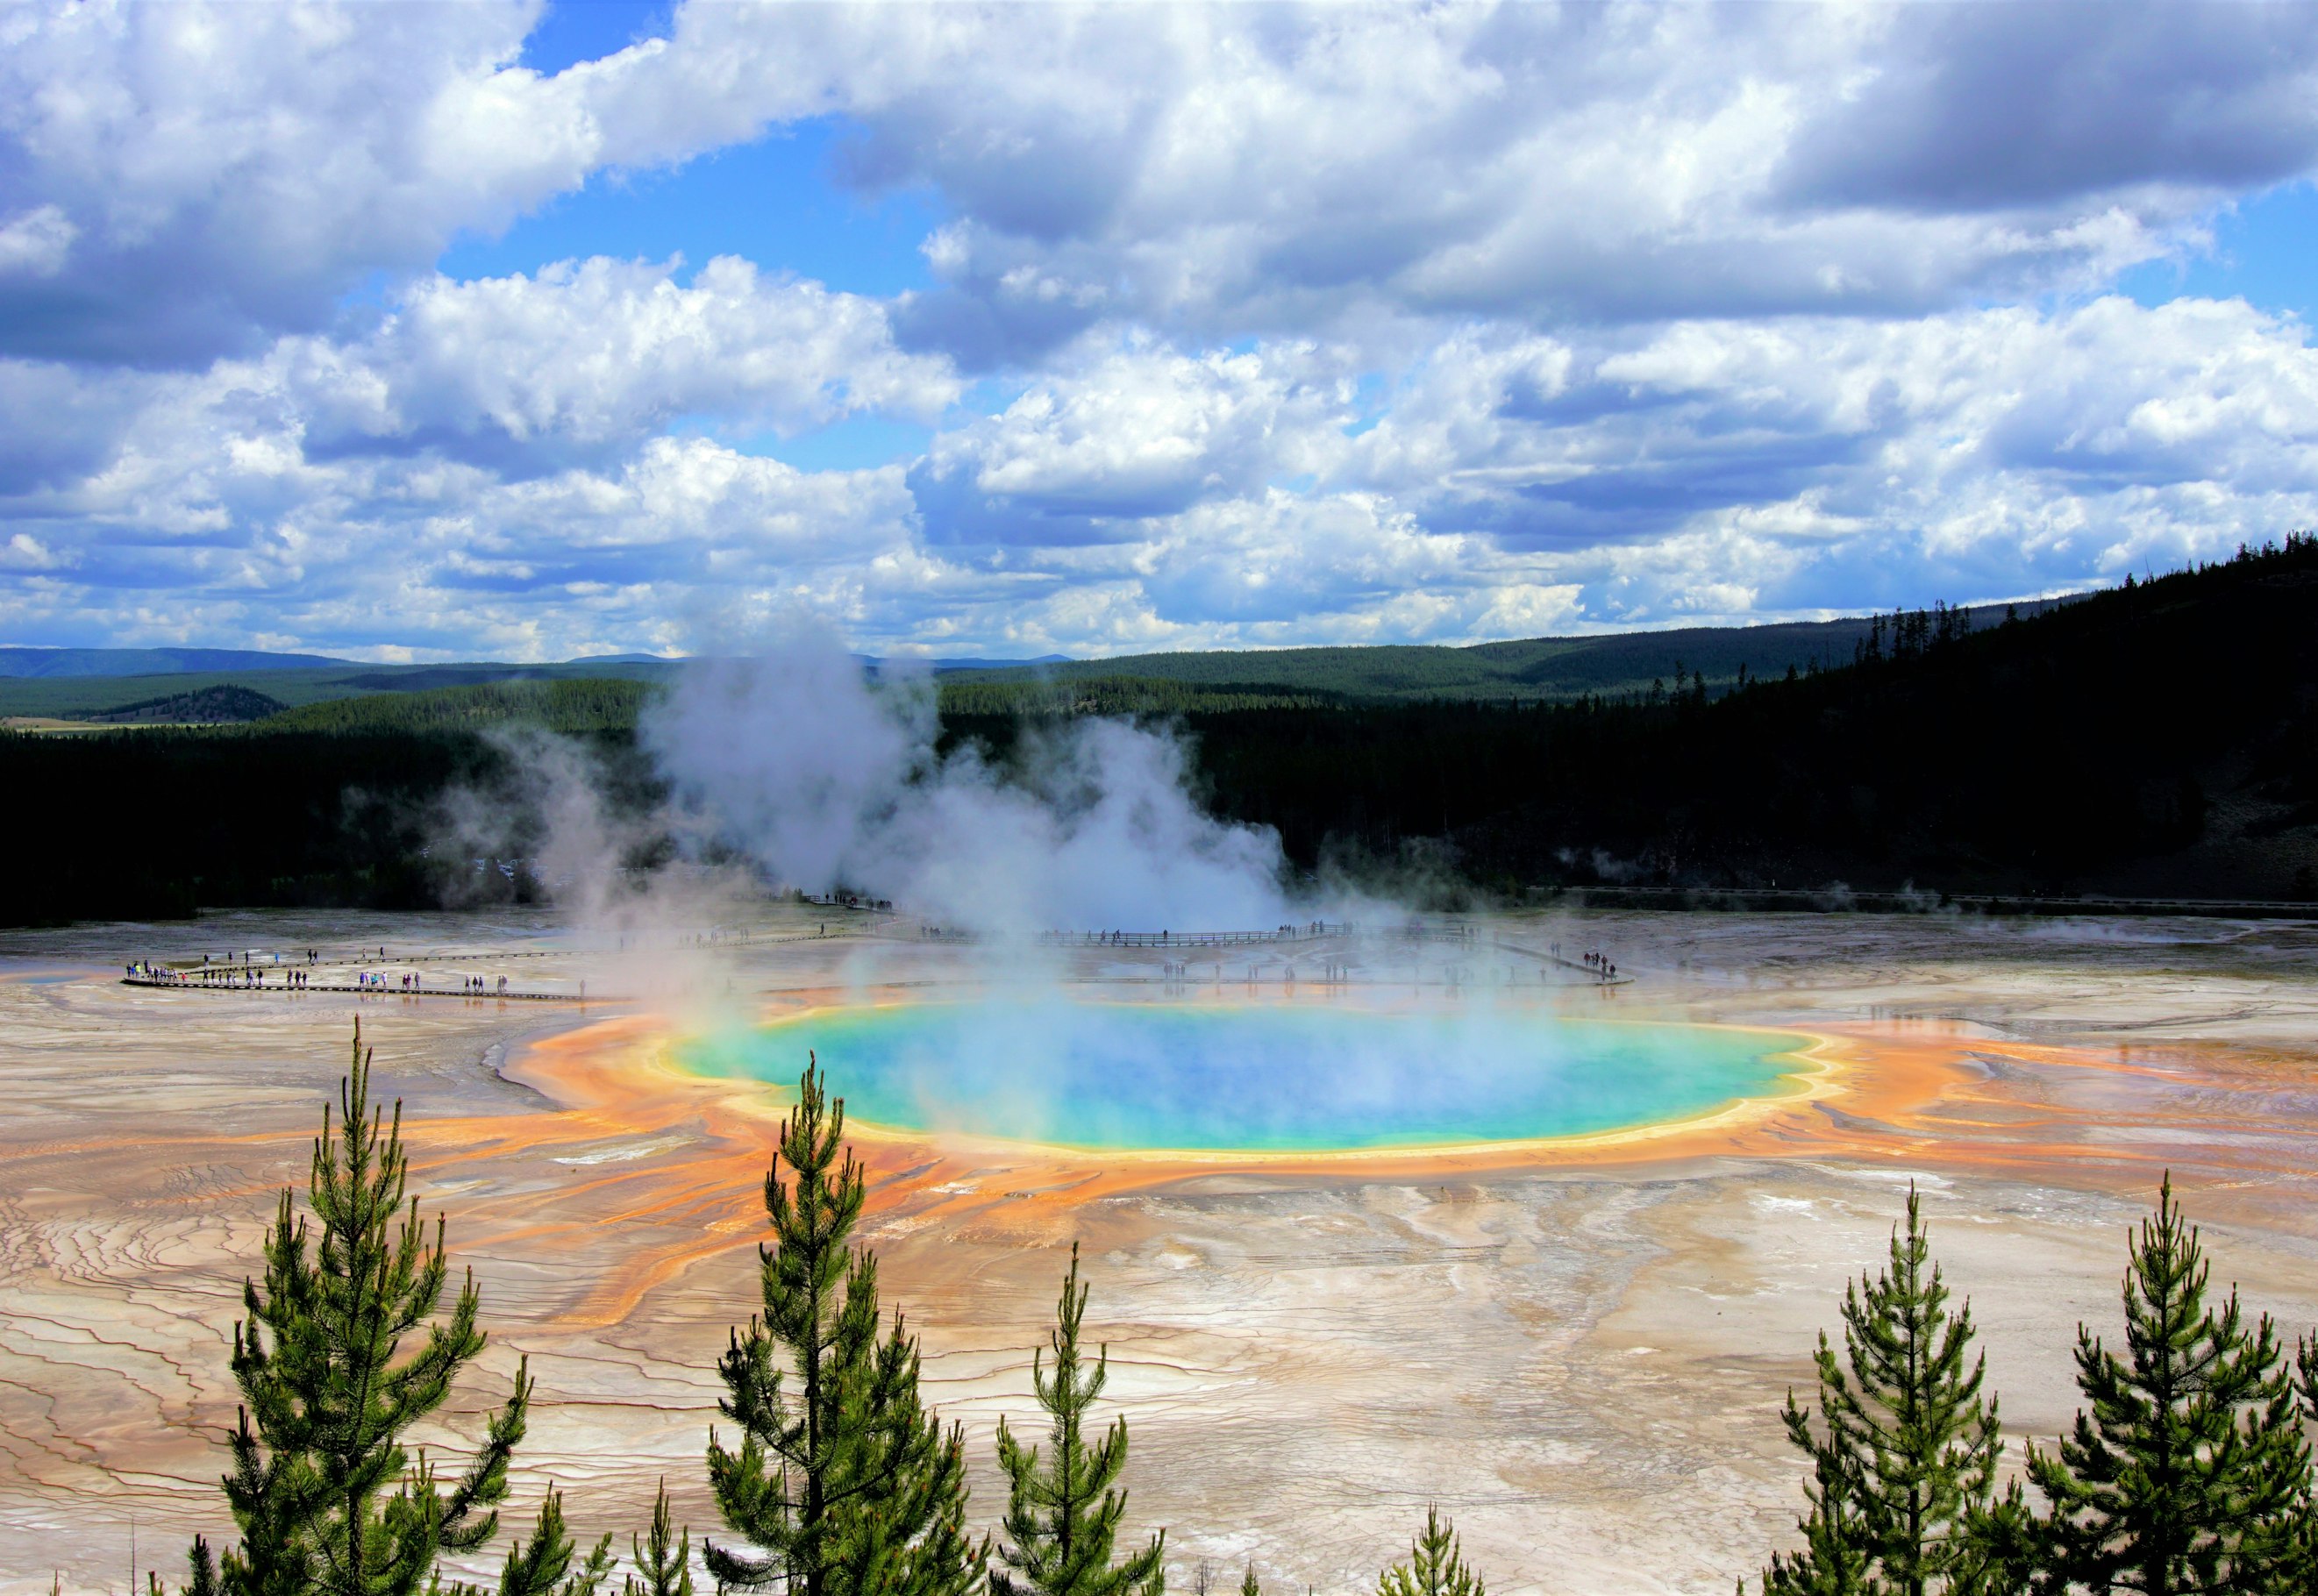 The Lost History of Yellowstone